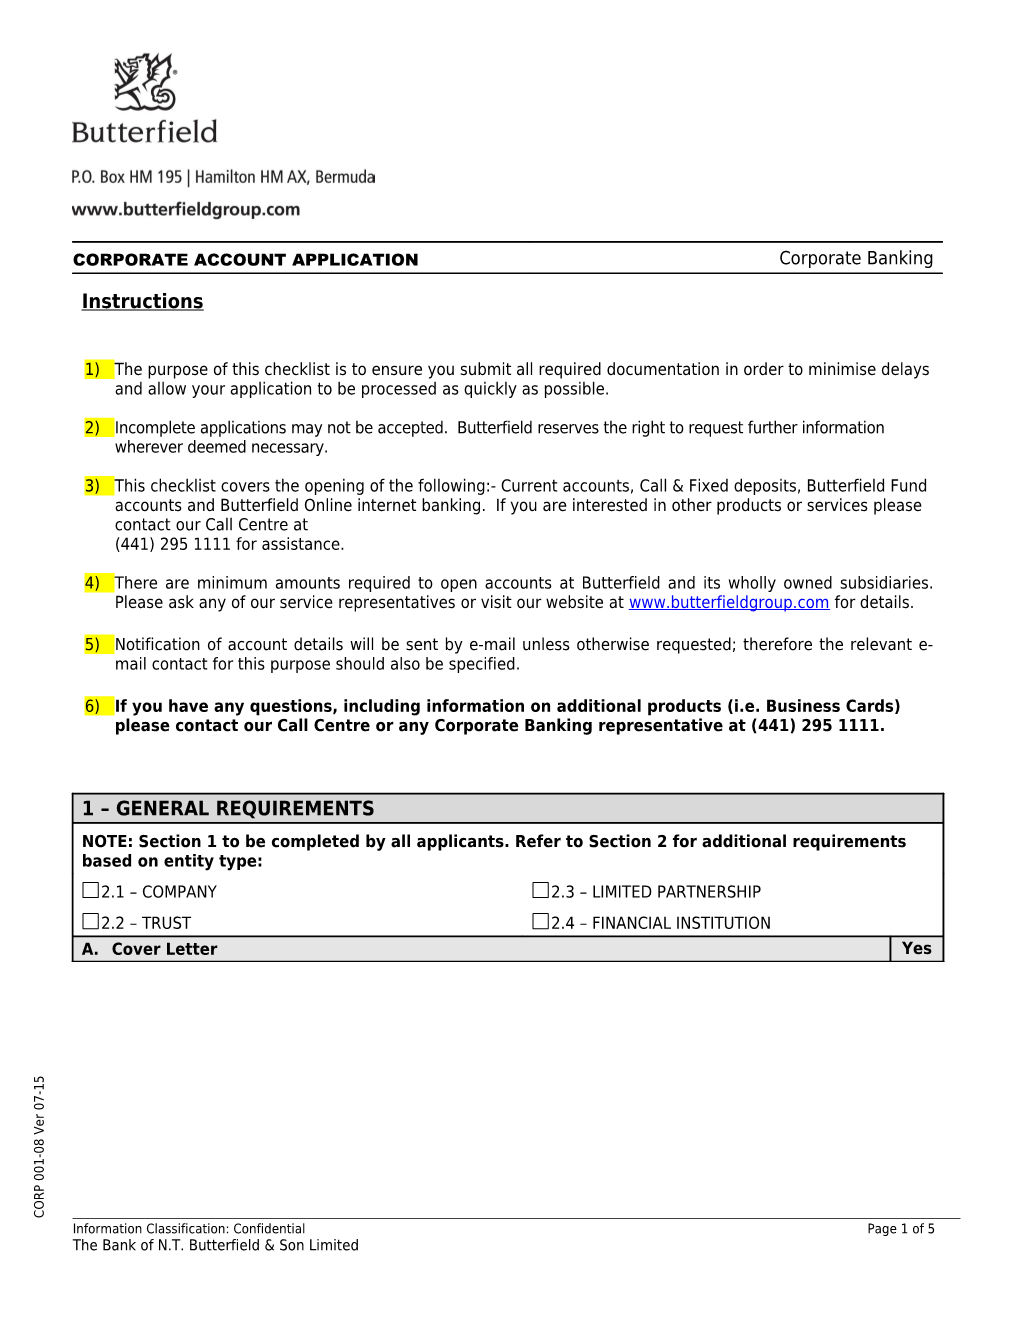 Information Classification: Confidential Page 4 of 4